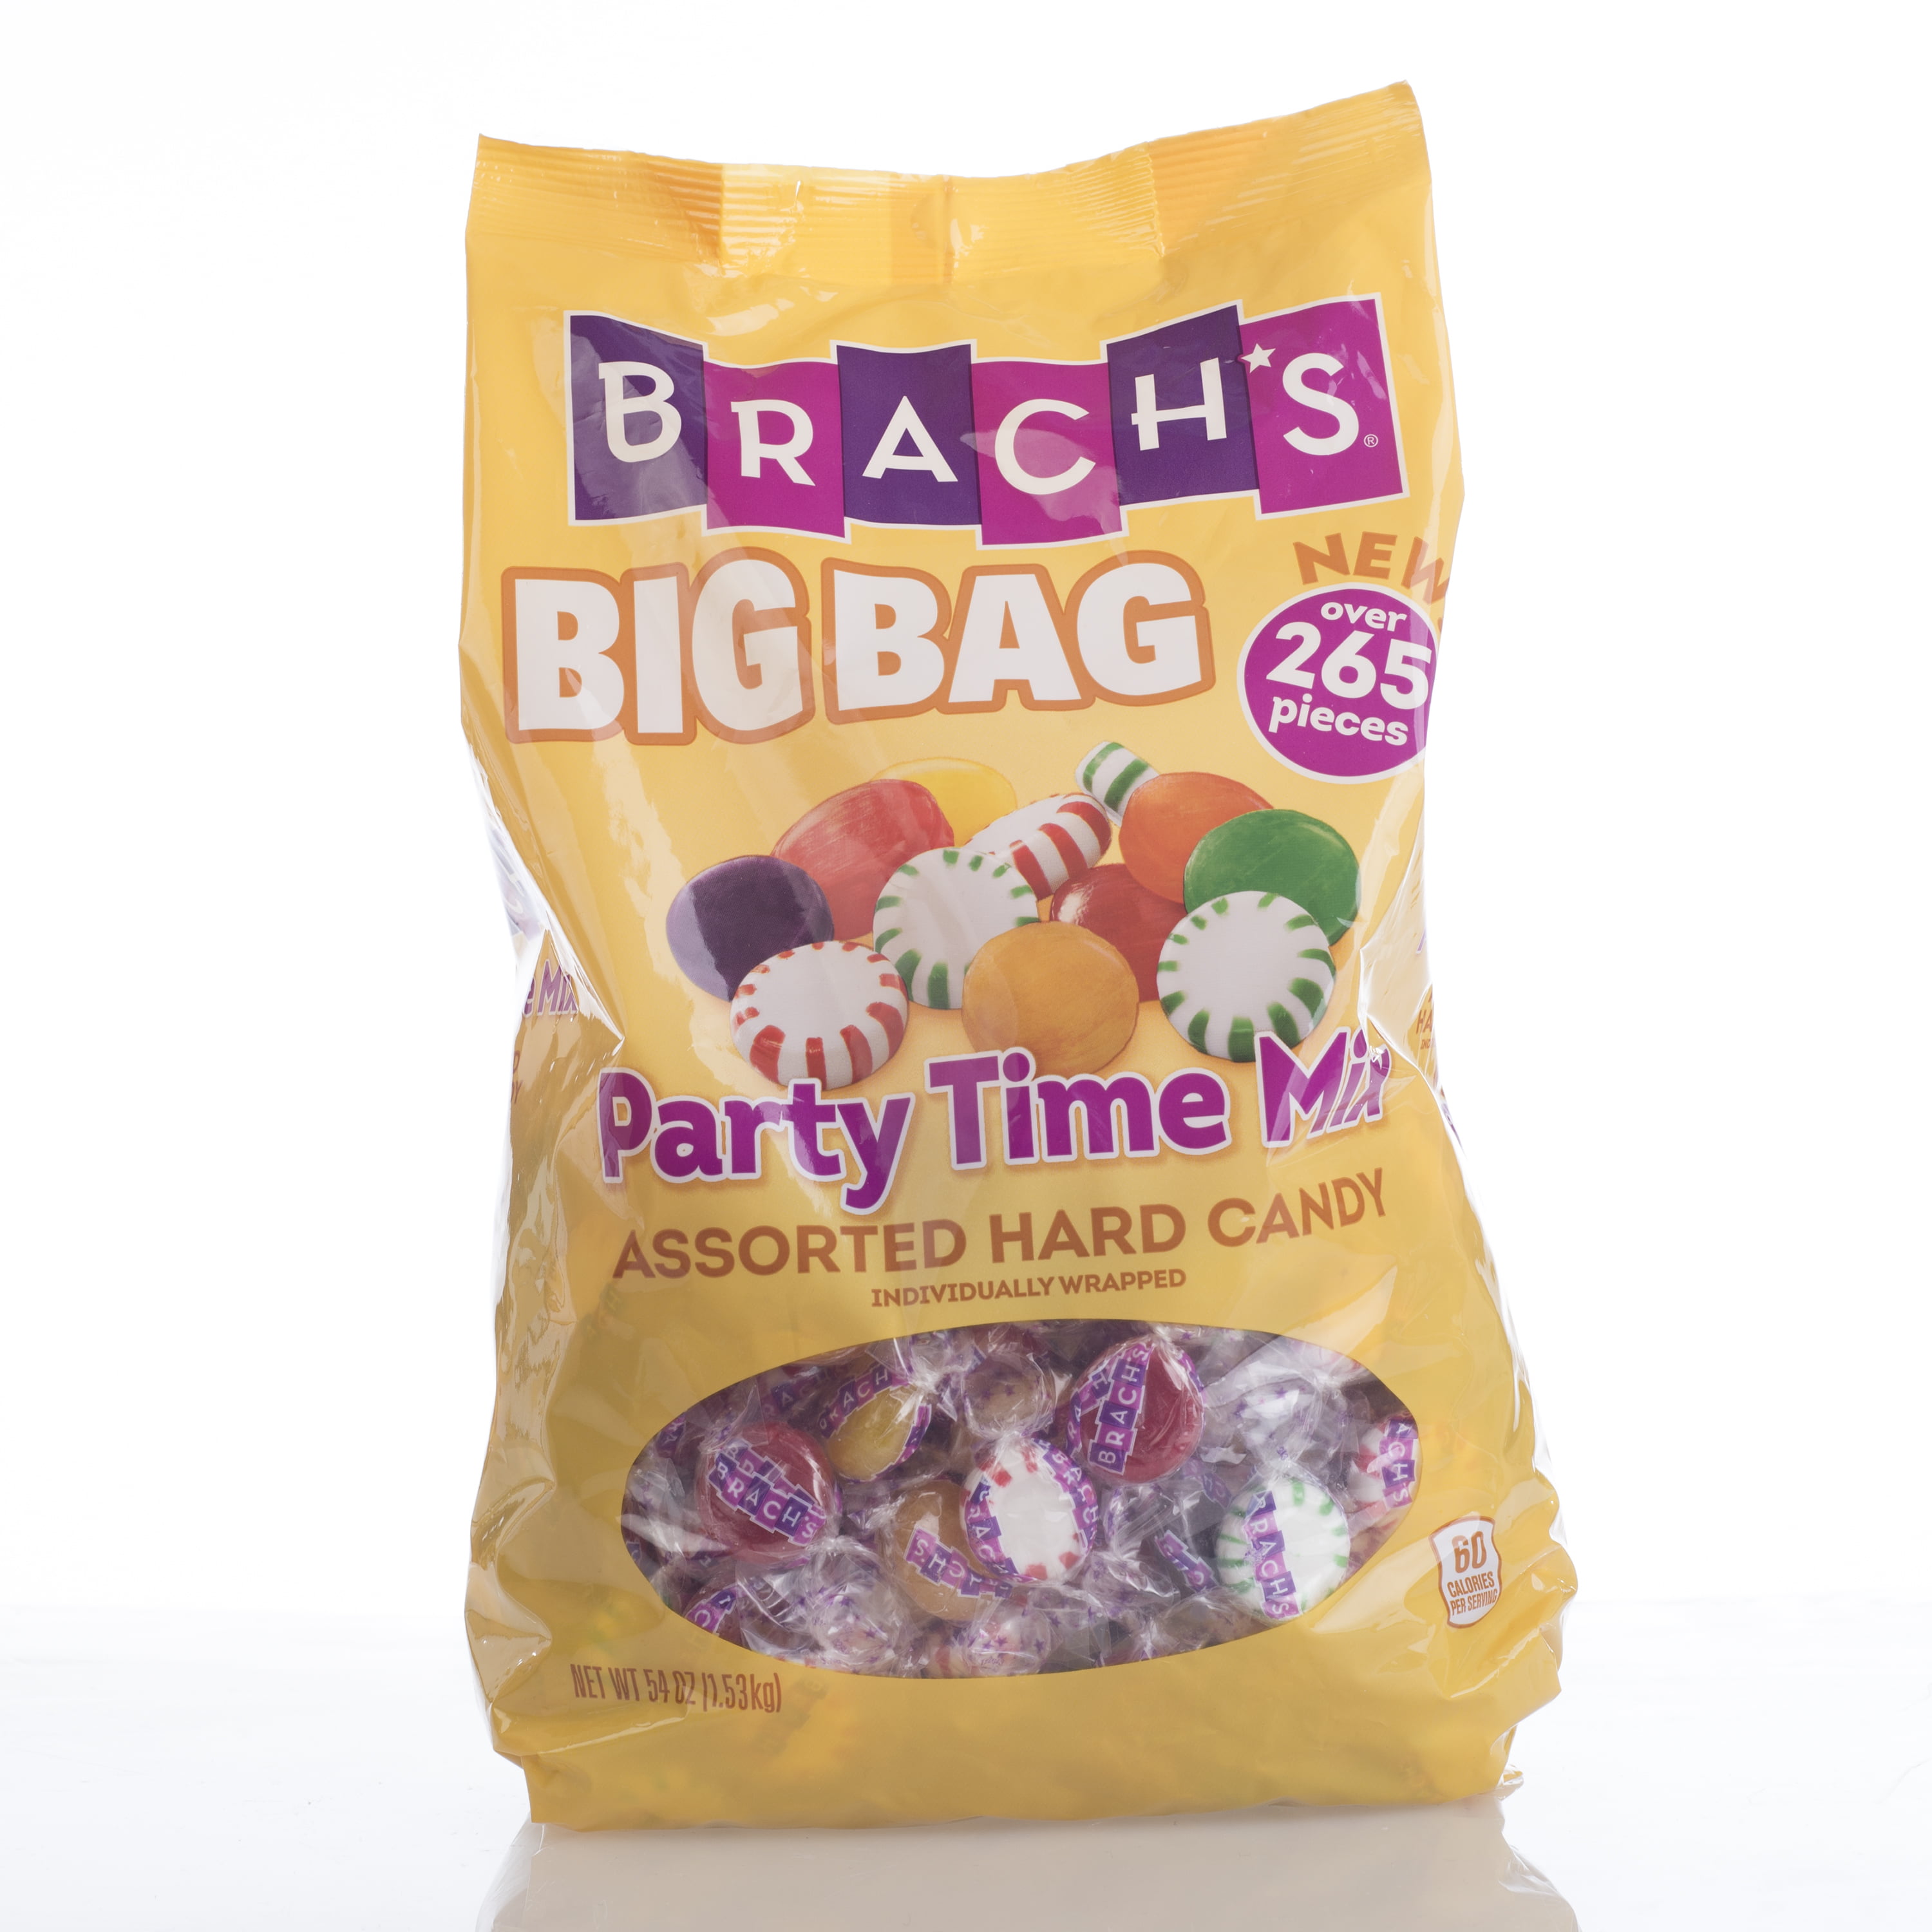 Brach's Party Time Mix Assorted Hard Candy Big Bag, 54 Oz., 265+ Count